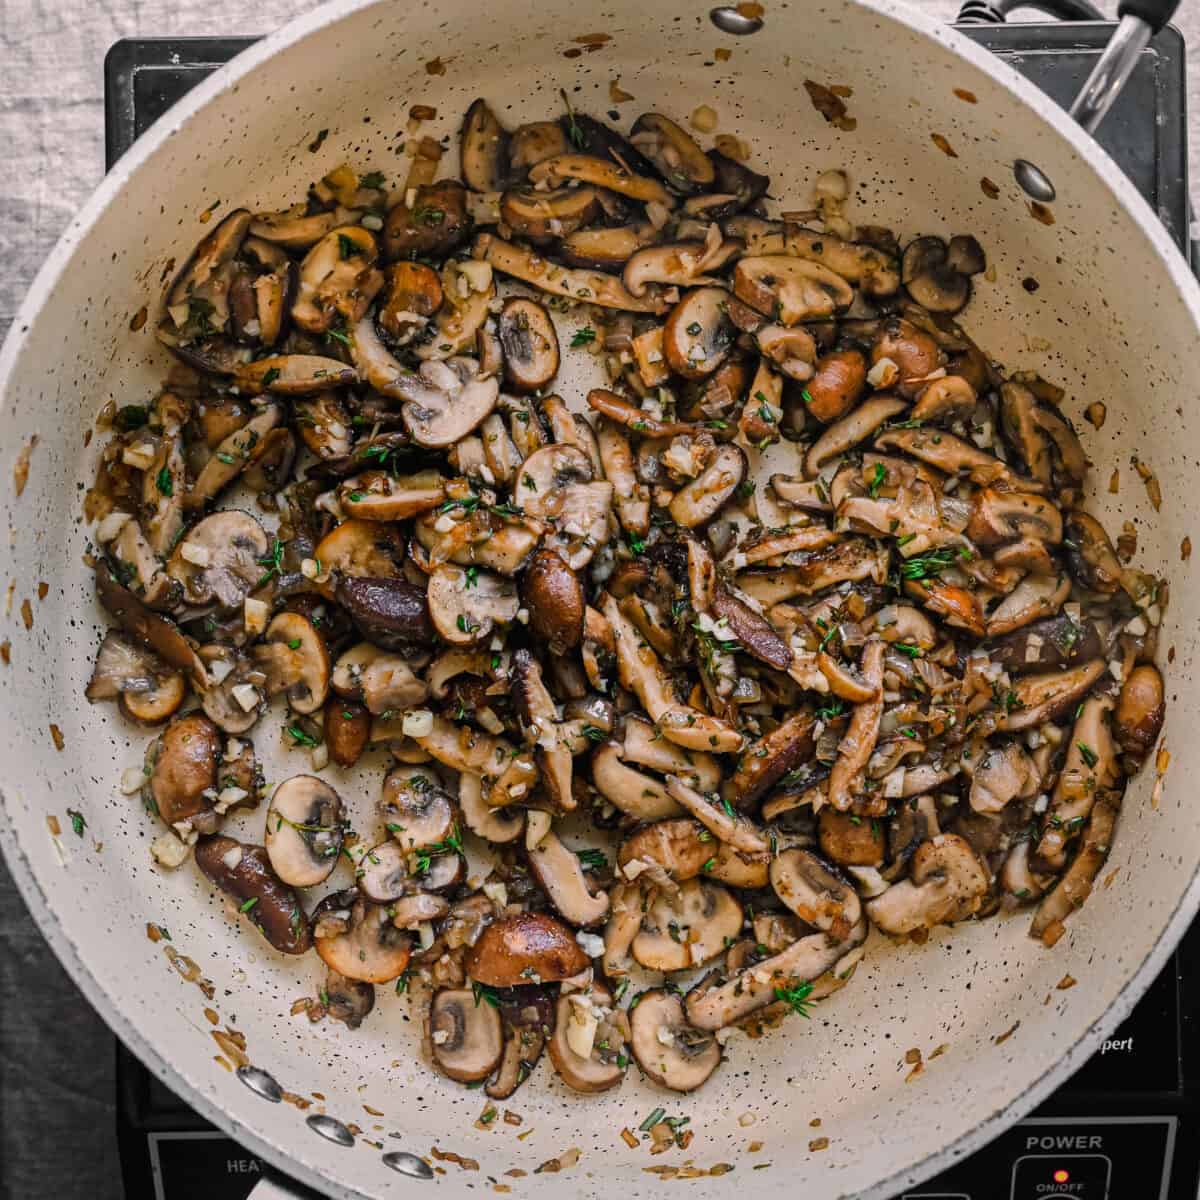 mushrooms cooked down with garlic and herbs in skillet